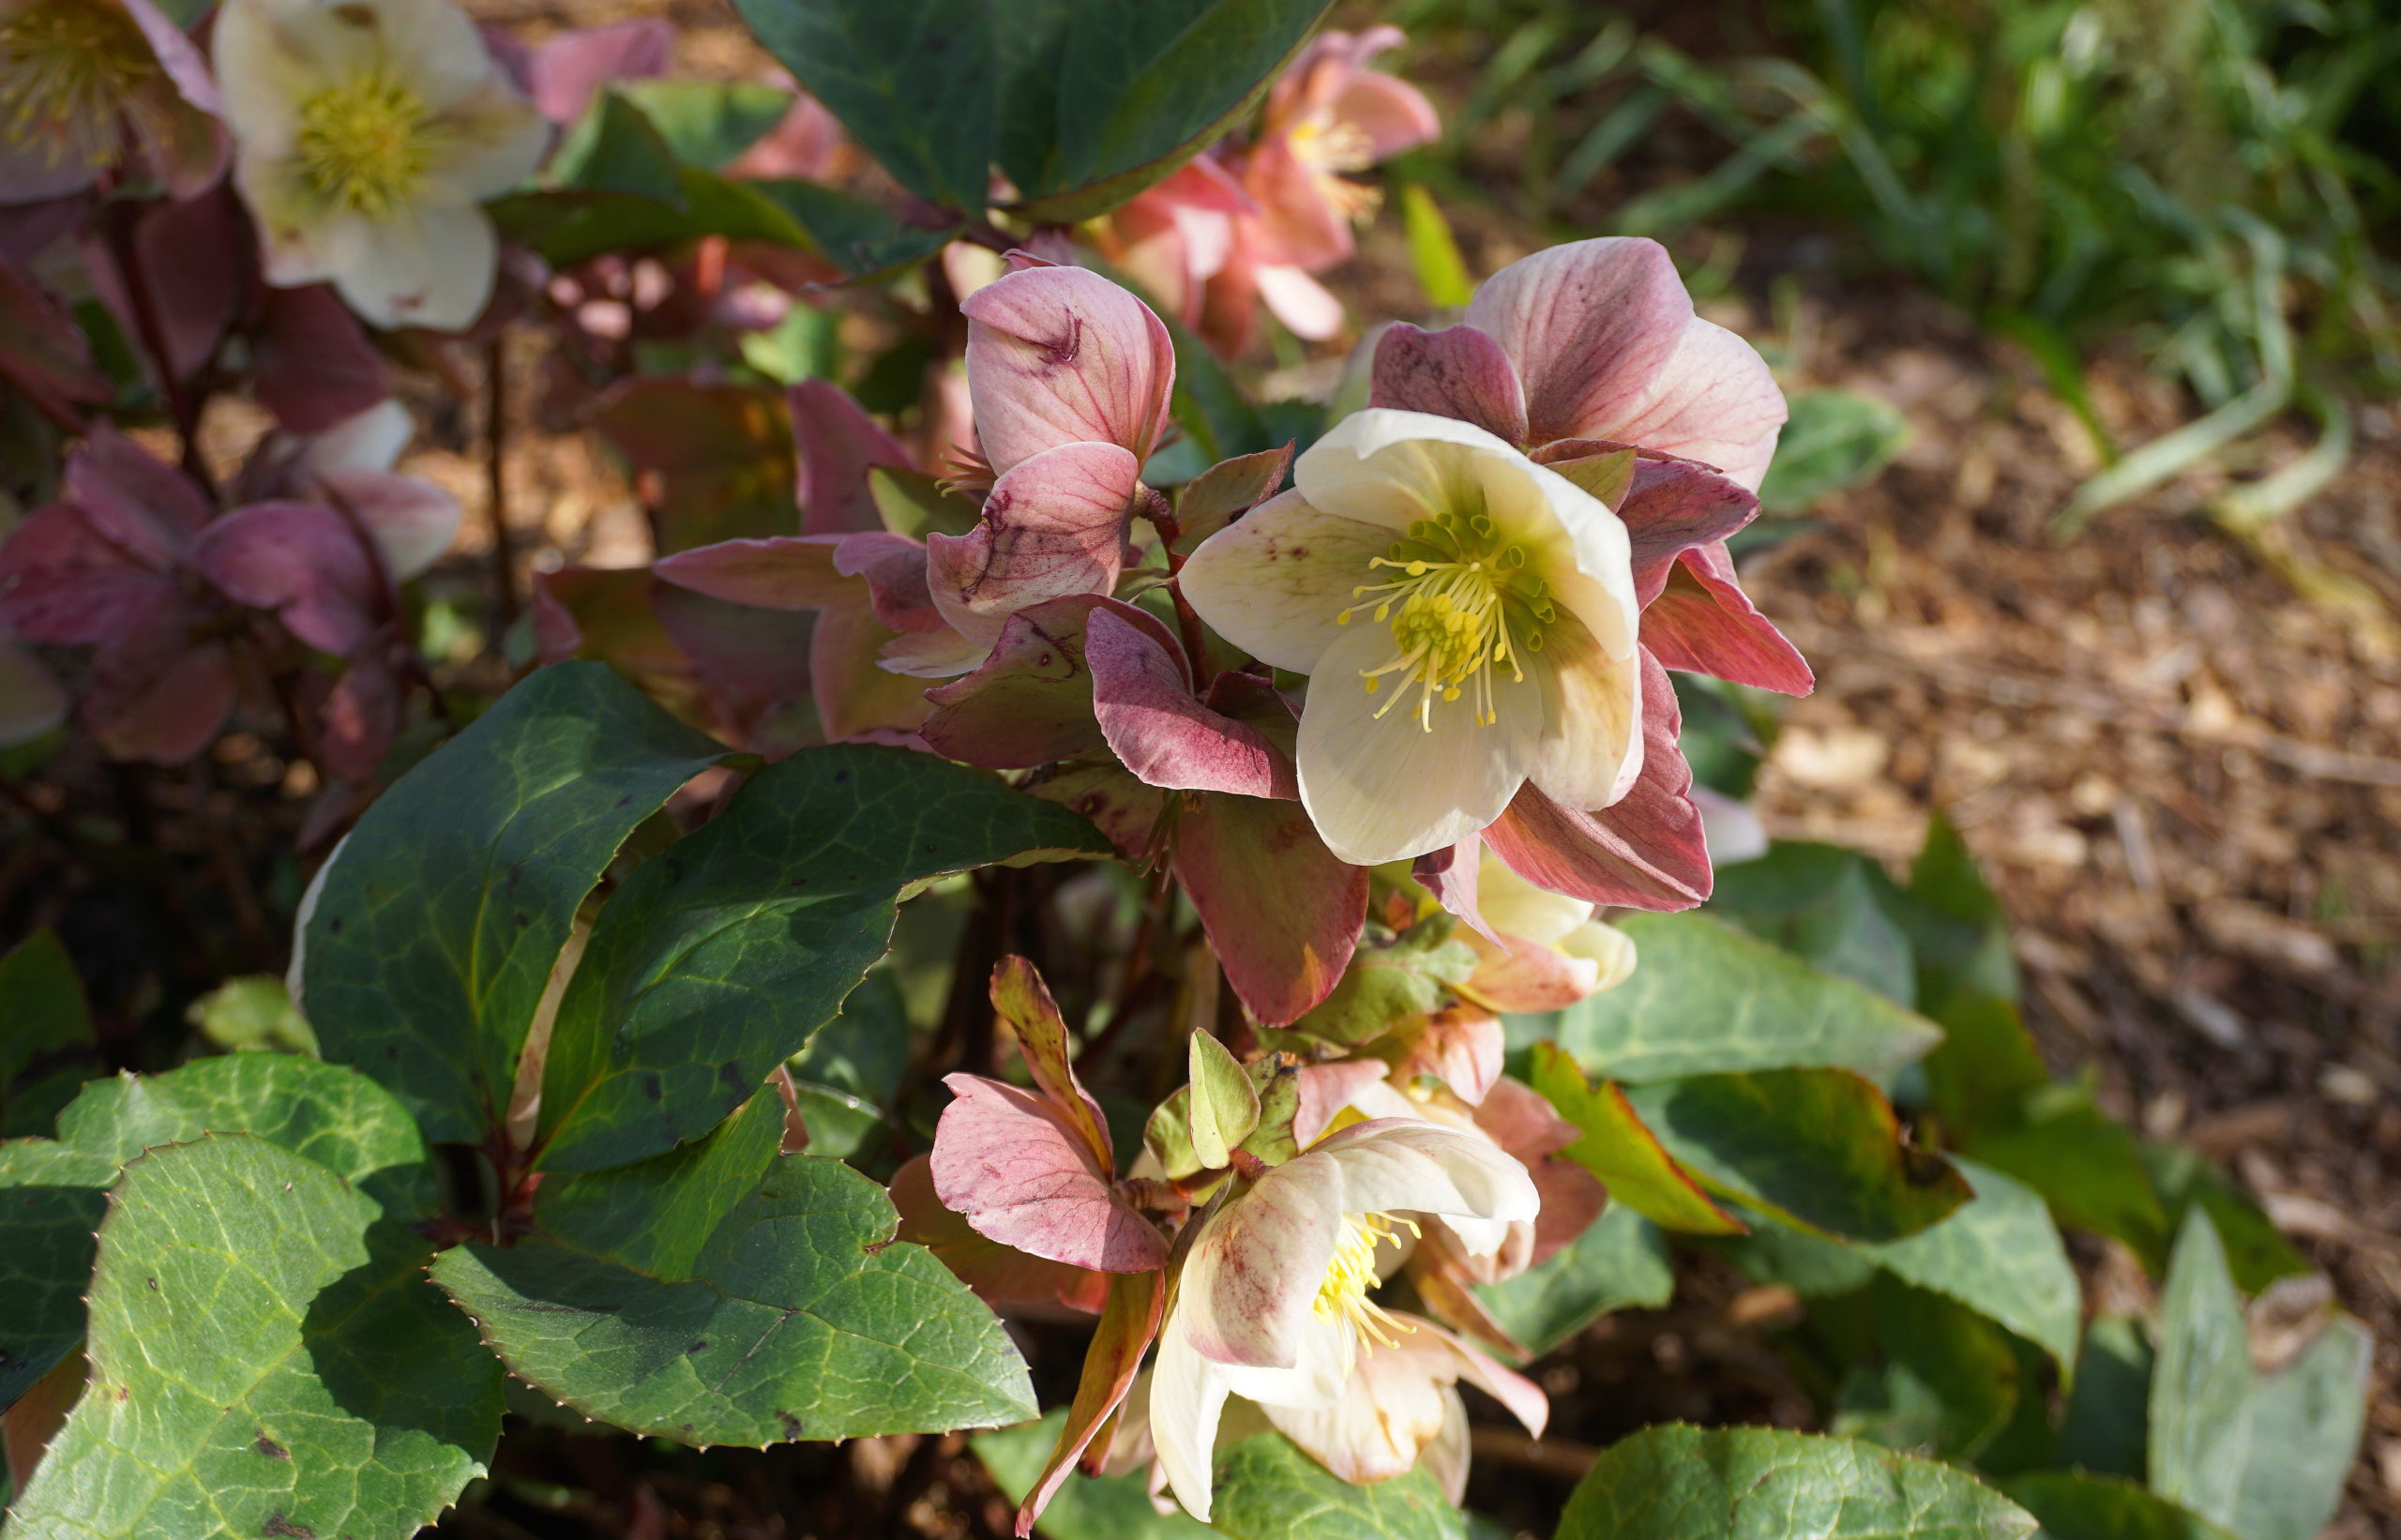 Early Spring Flowers - Hellebores, Bluebells, Crocus, Squill, Violas, and  More